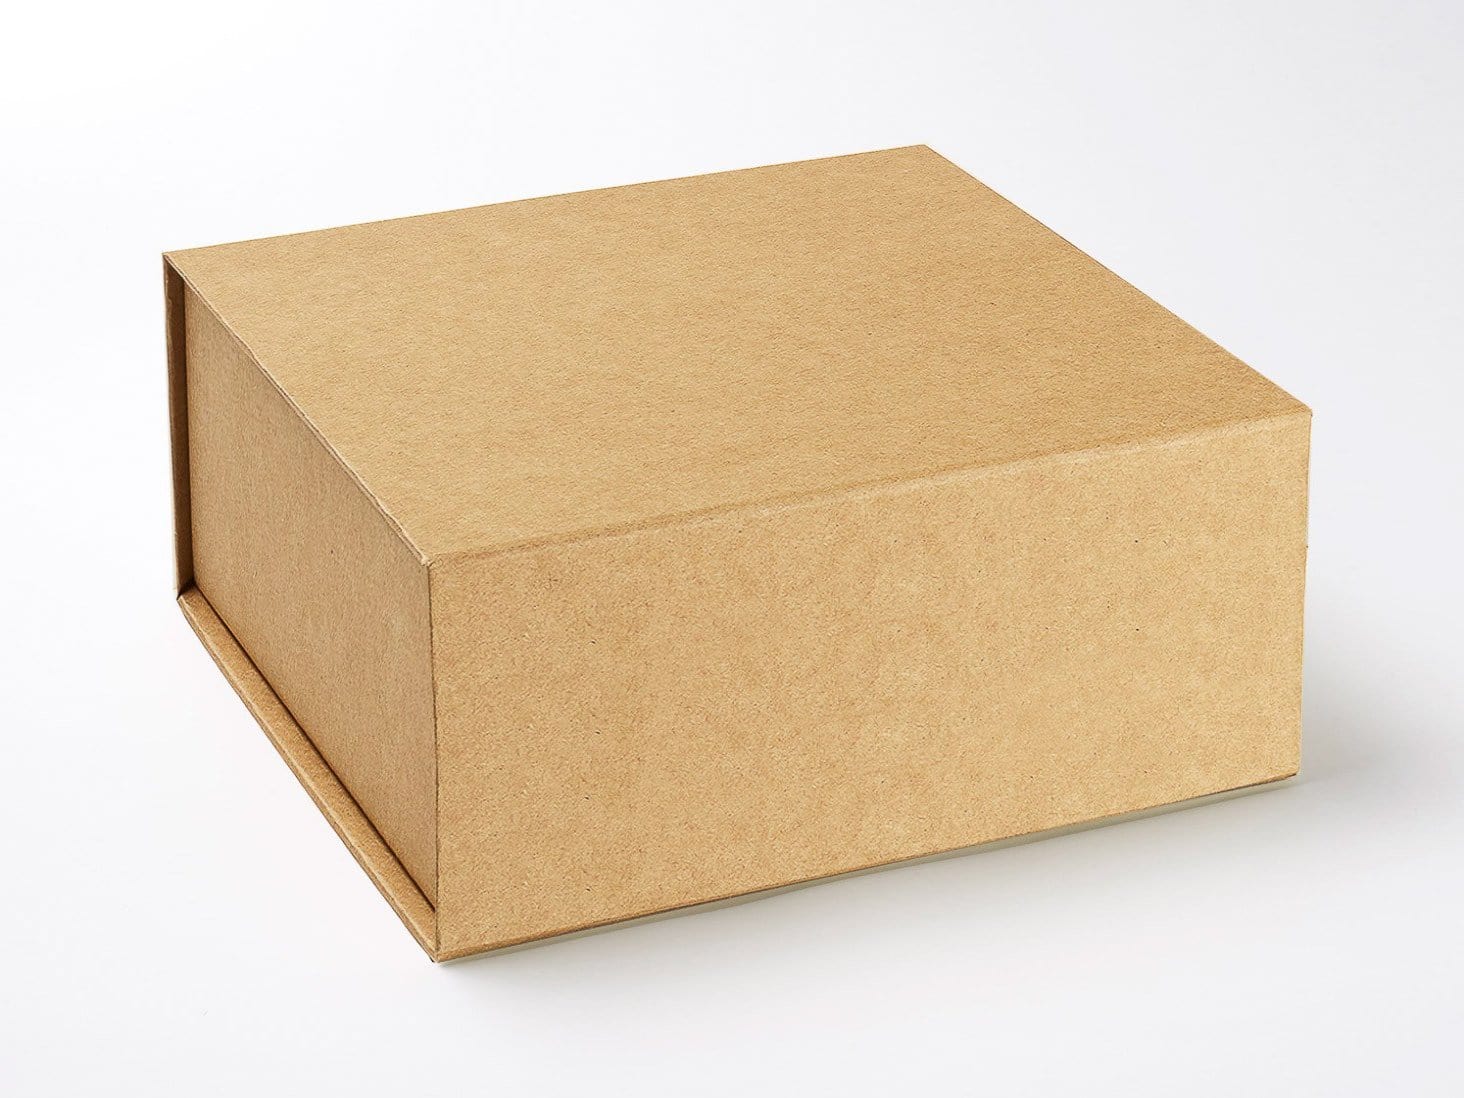 Natural Kraft Extra Large Gift Boxes for Eco-Friendly Gift